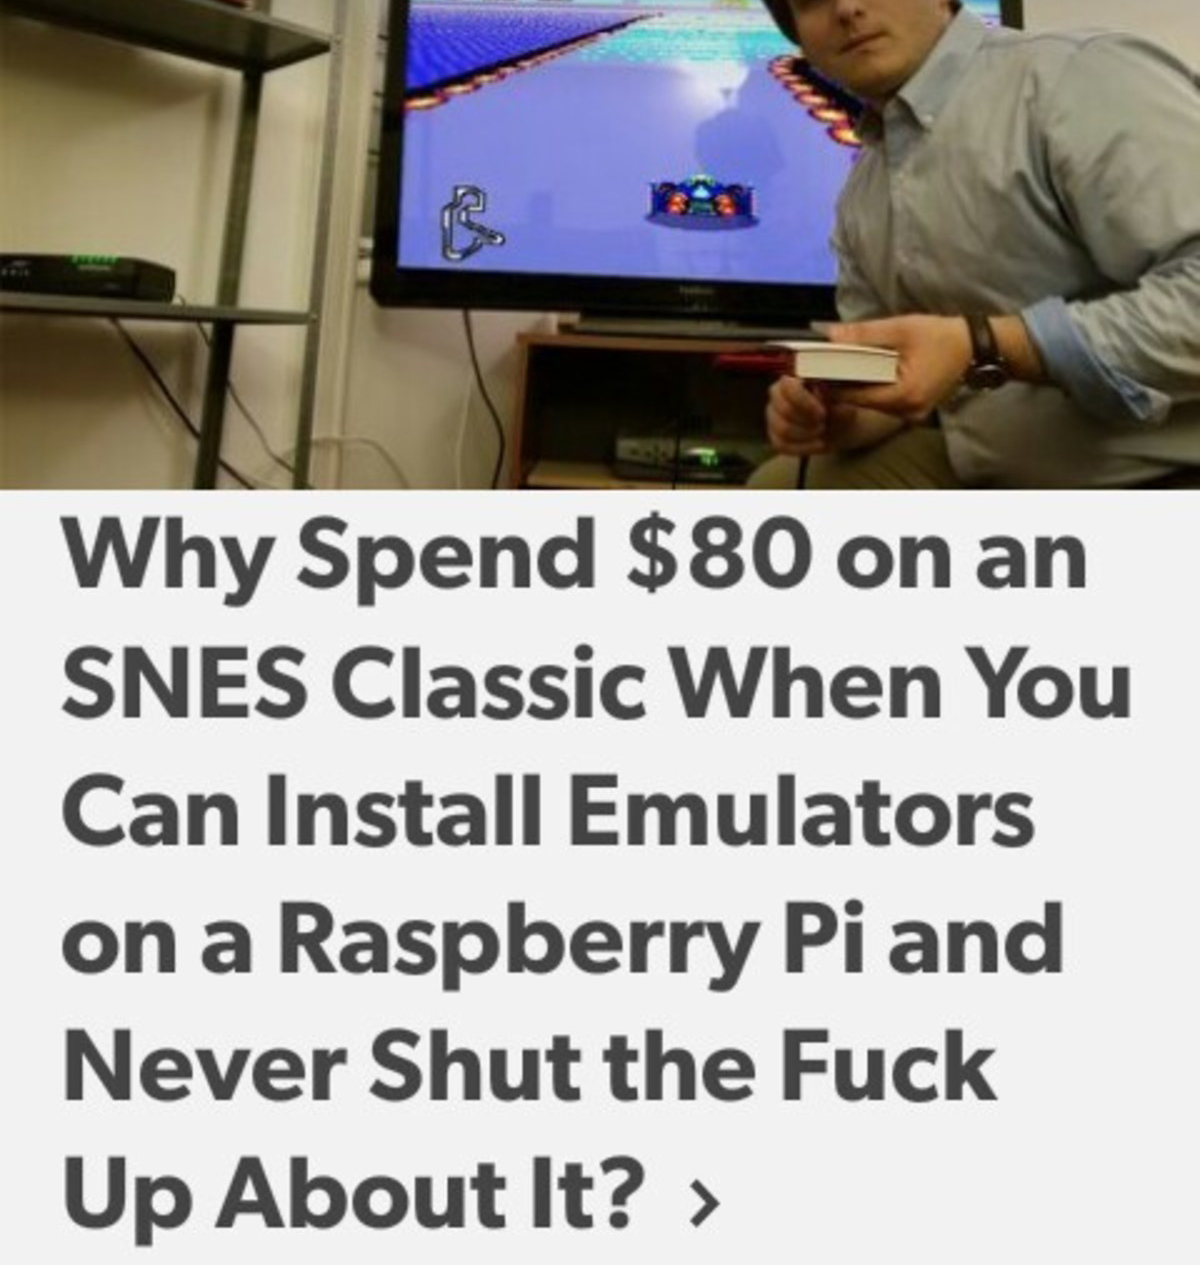 dank meme about no need to spend $80 on a SNES classic when you can install emulators on a Raspberry Pi and talk about it forever.